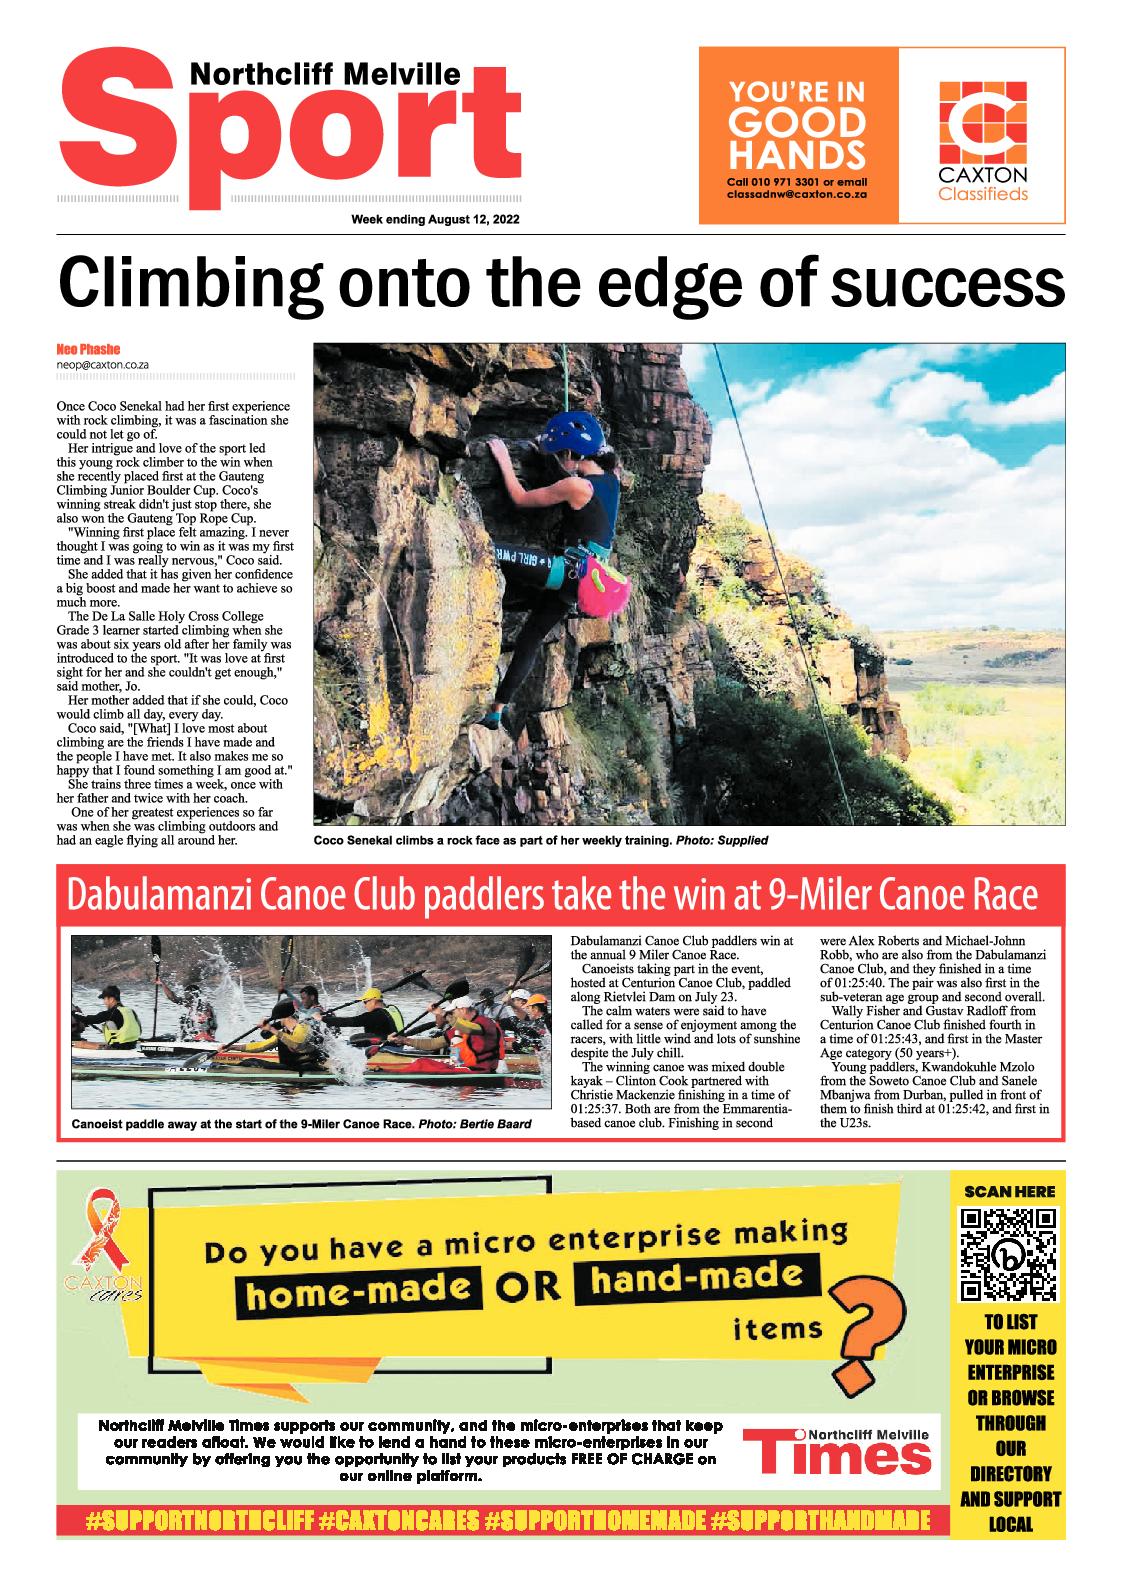 Northcliff Melville Times August 12 2022 page 8